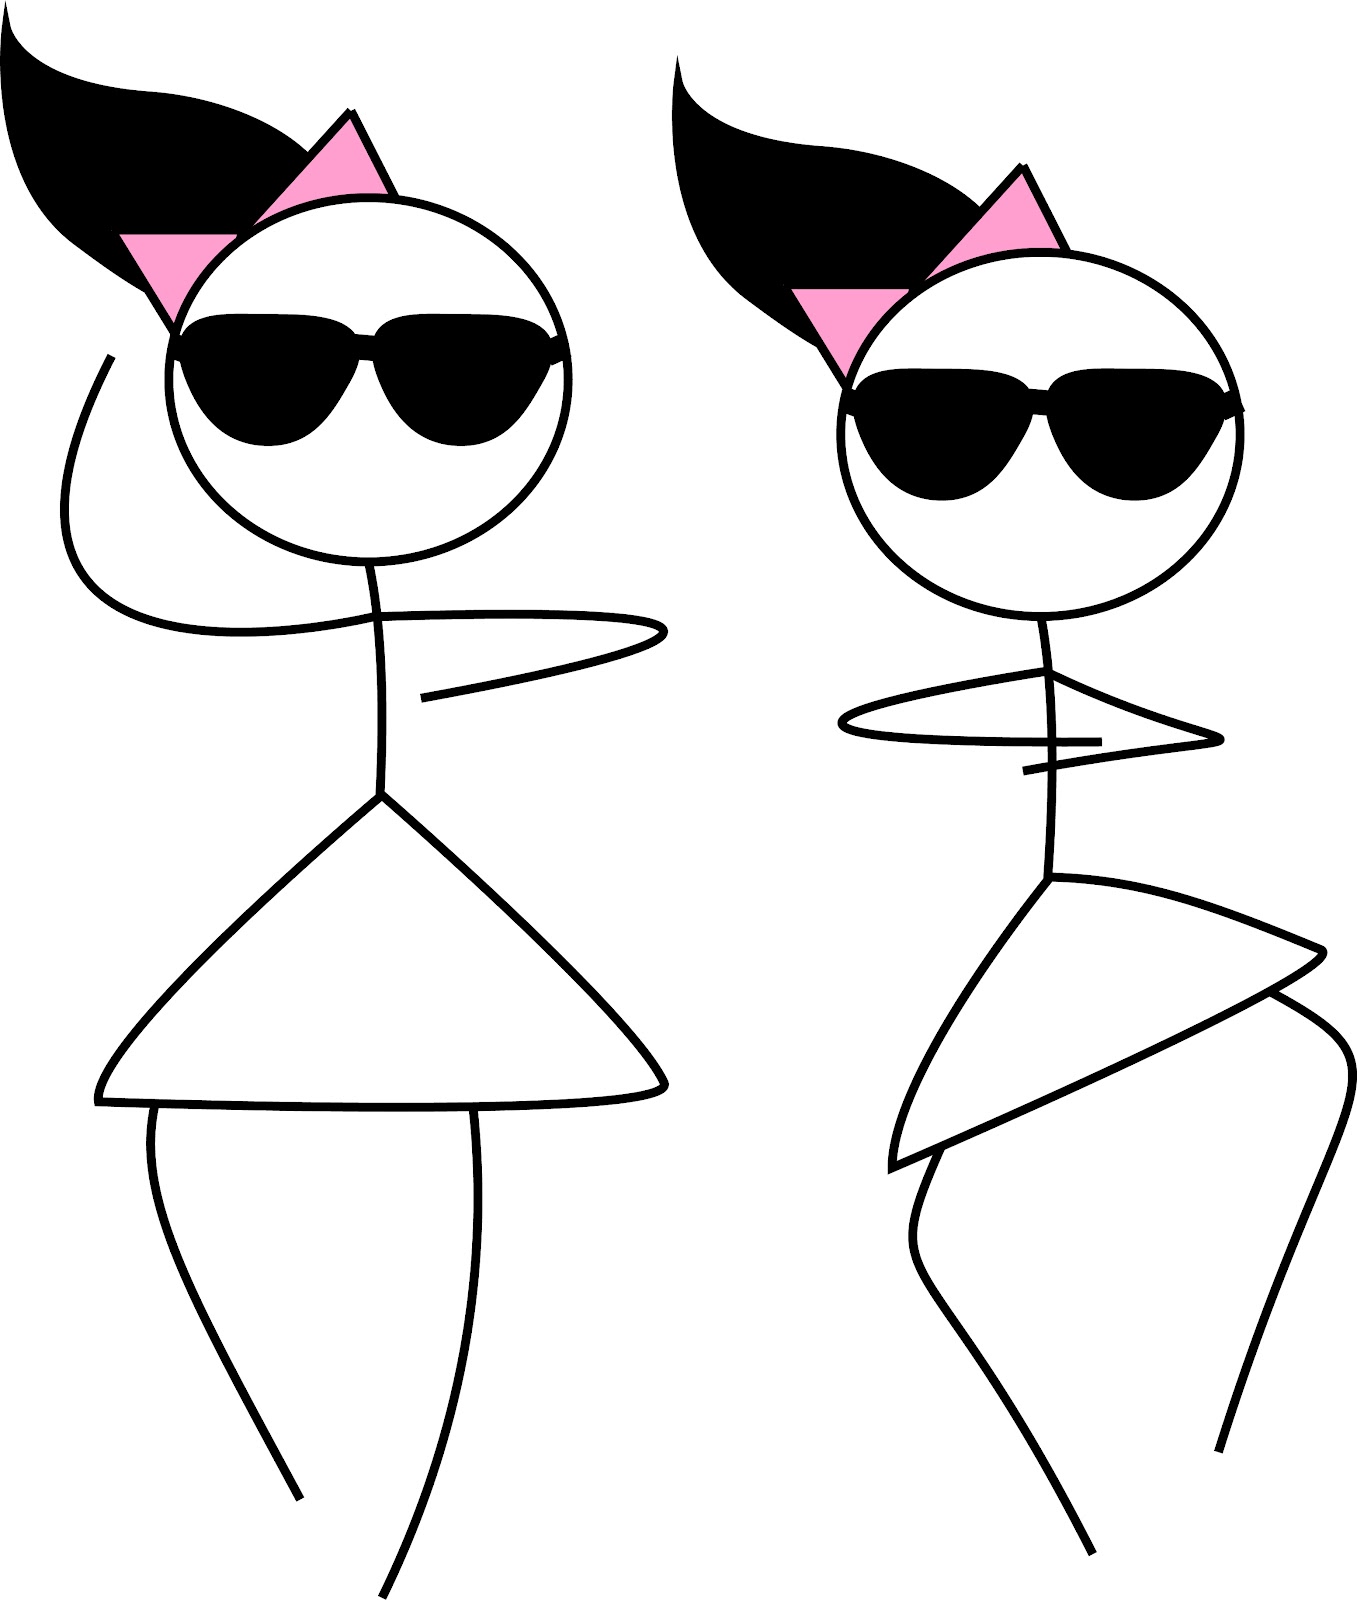 Simple Drawing: my gangnam style - ClipArt Best - ClipArt Best